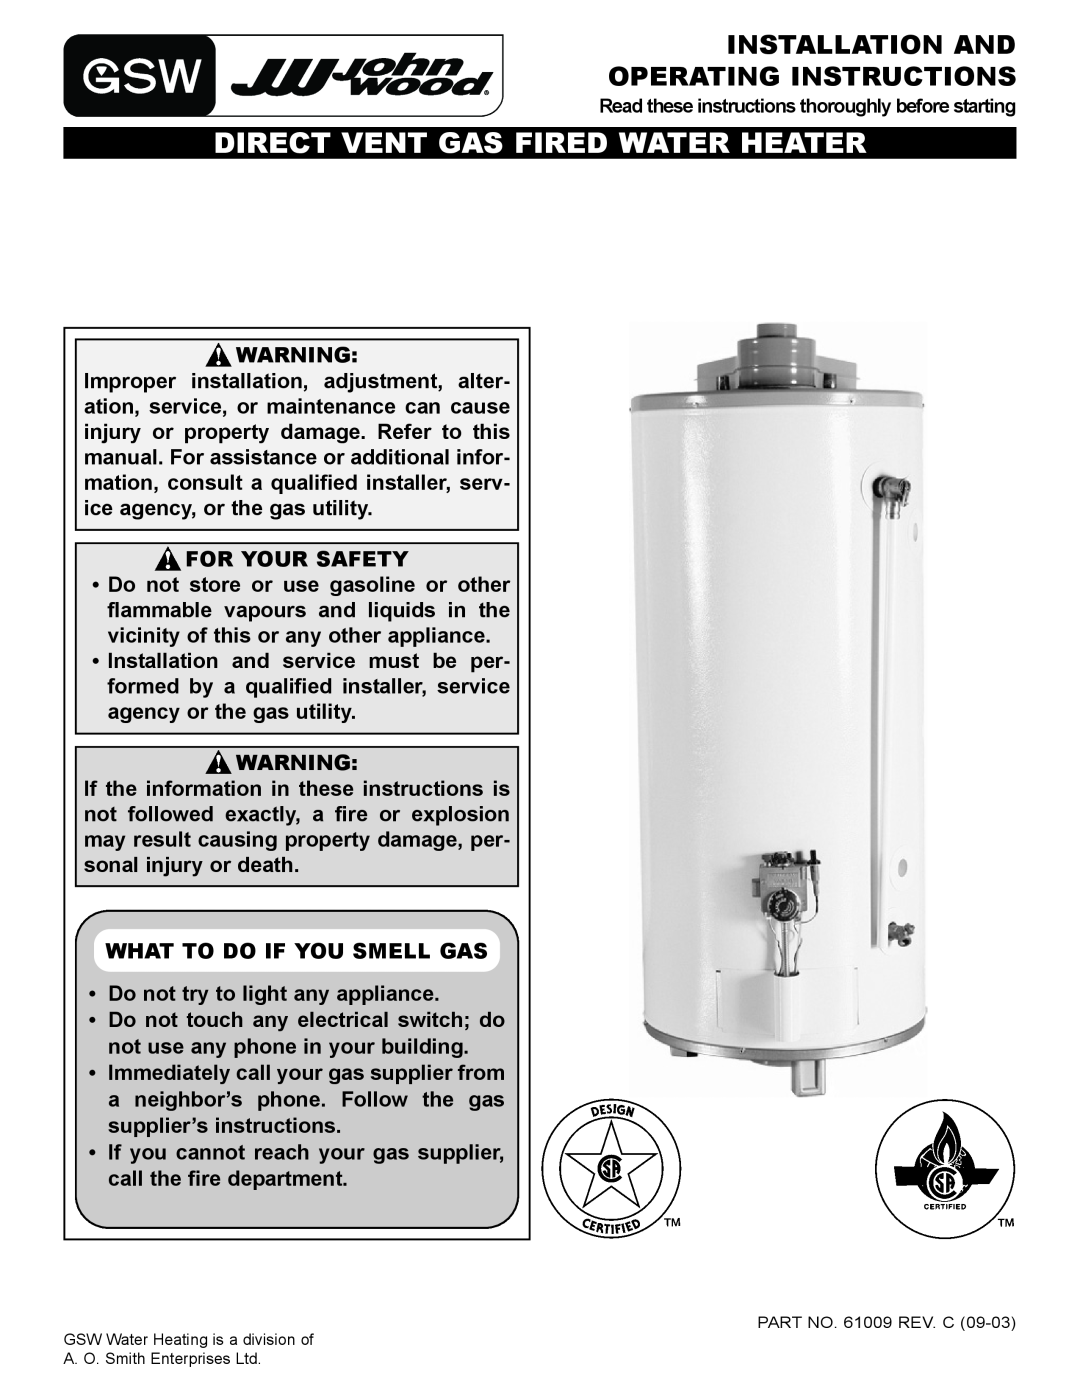 GSW 61009 REV. C (09-03) manual For Your Safety, What To Do If You Smell Gas, Do not try to light any appliance 